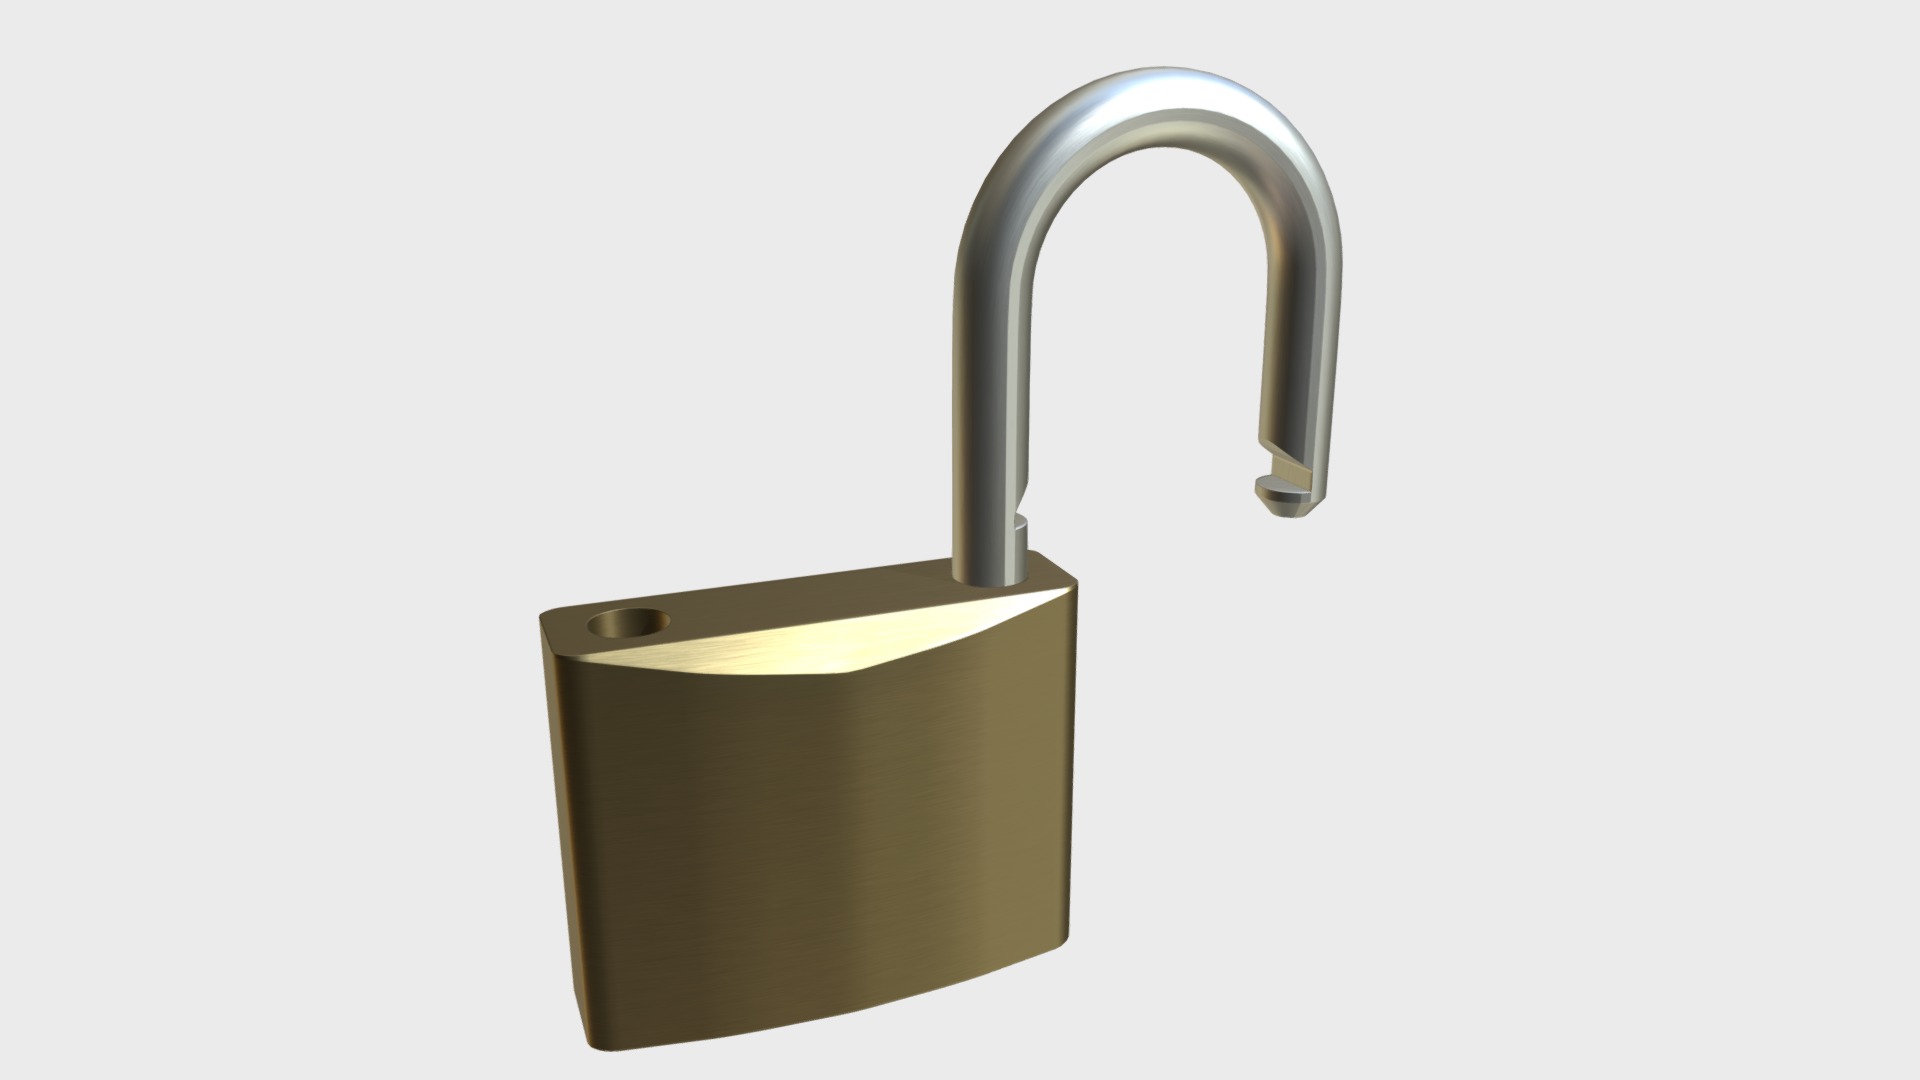 3D model Openable padlock - This is a 3D model of the Openable padlock. The 3D model is about a metal padlock with a handle.